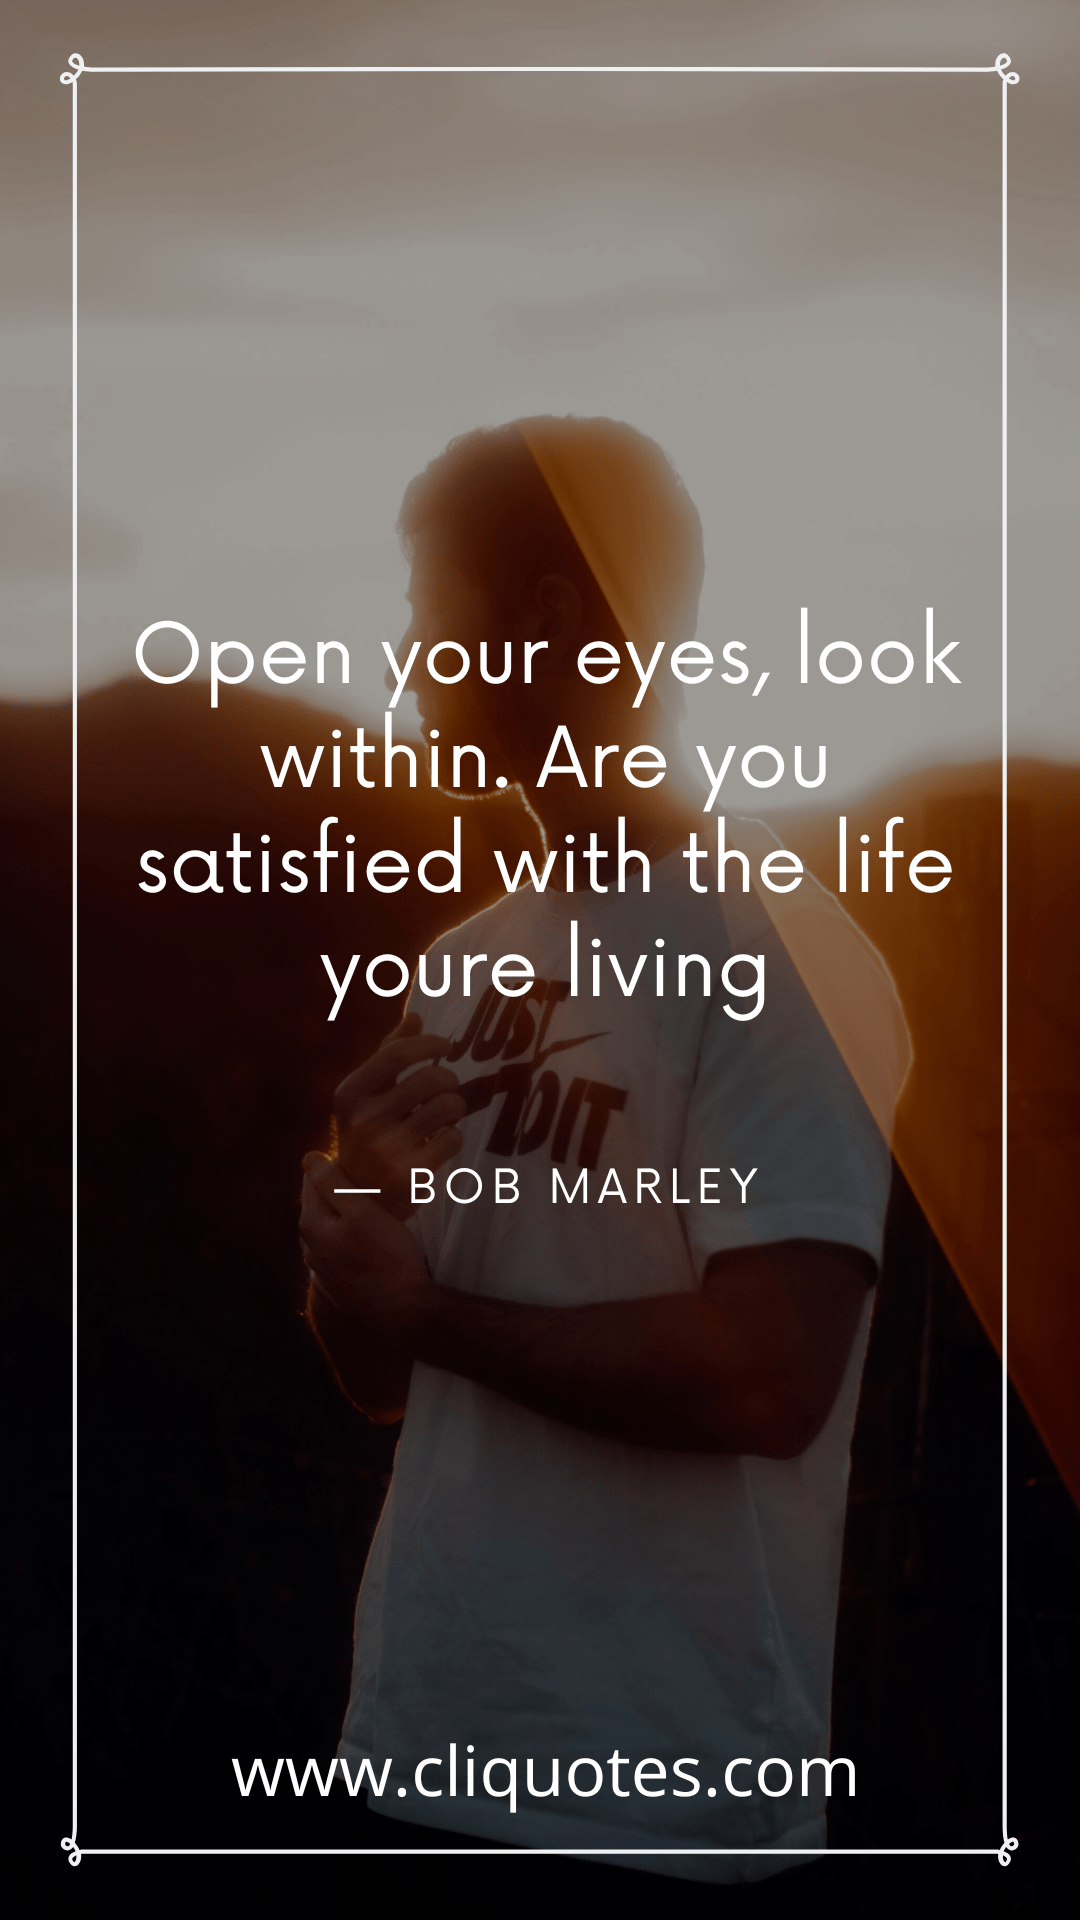 Open your eyes, look within. Are you satisfied with the life youre living. -bob marley